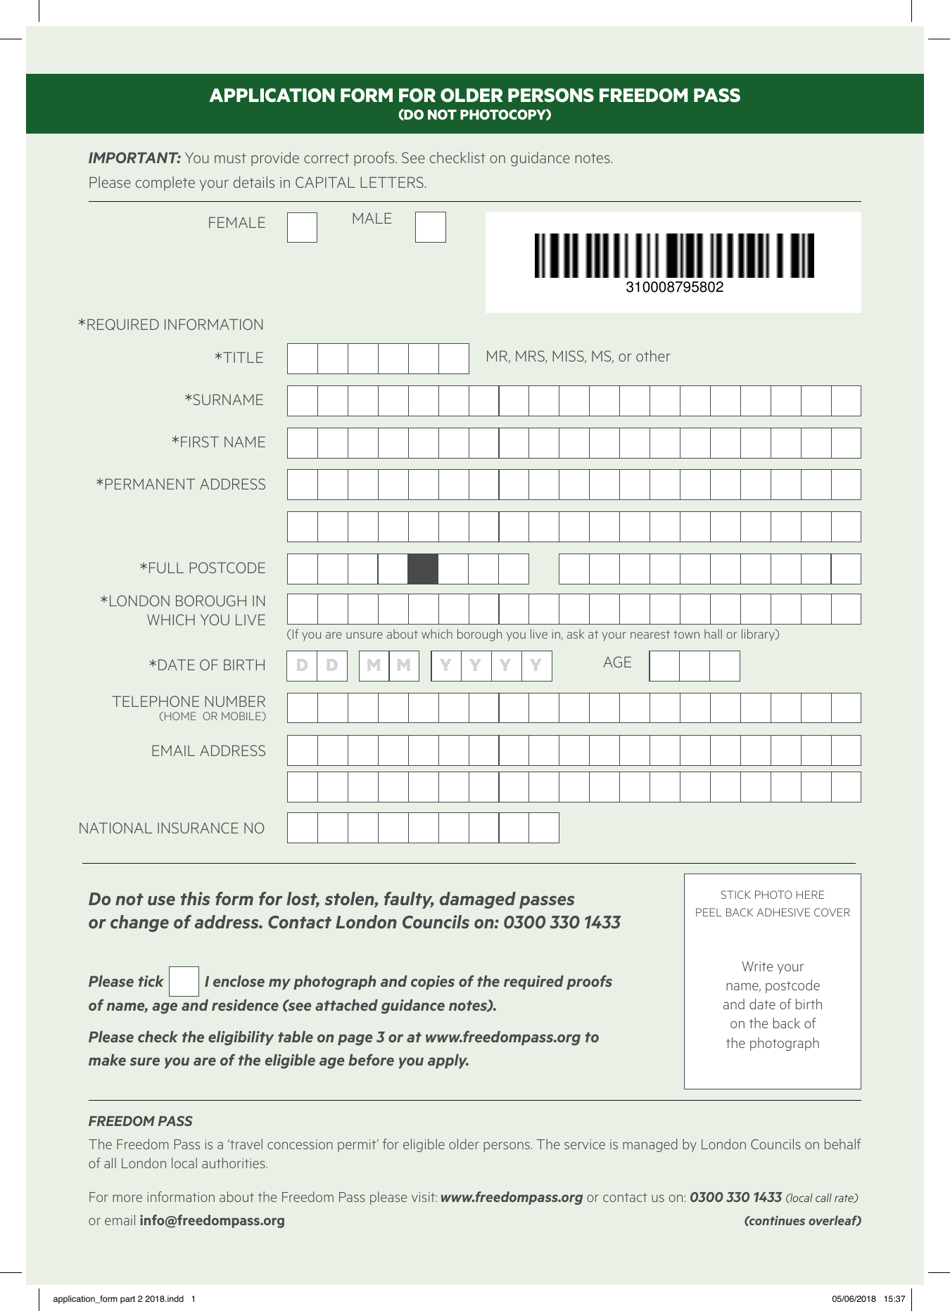 Application Form for Older Persons Freedom Pass - Greater London, United Kingdom, Page 1